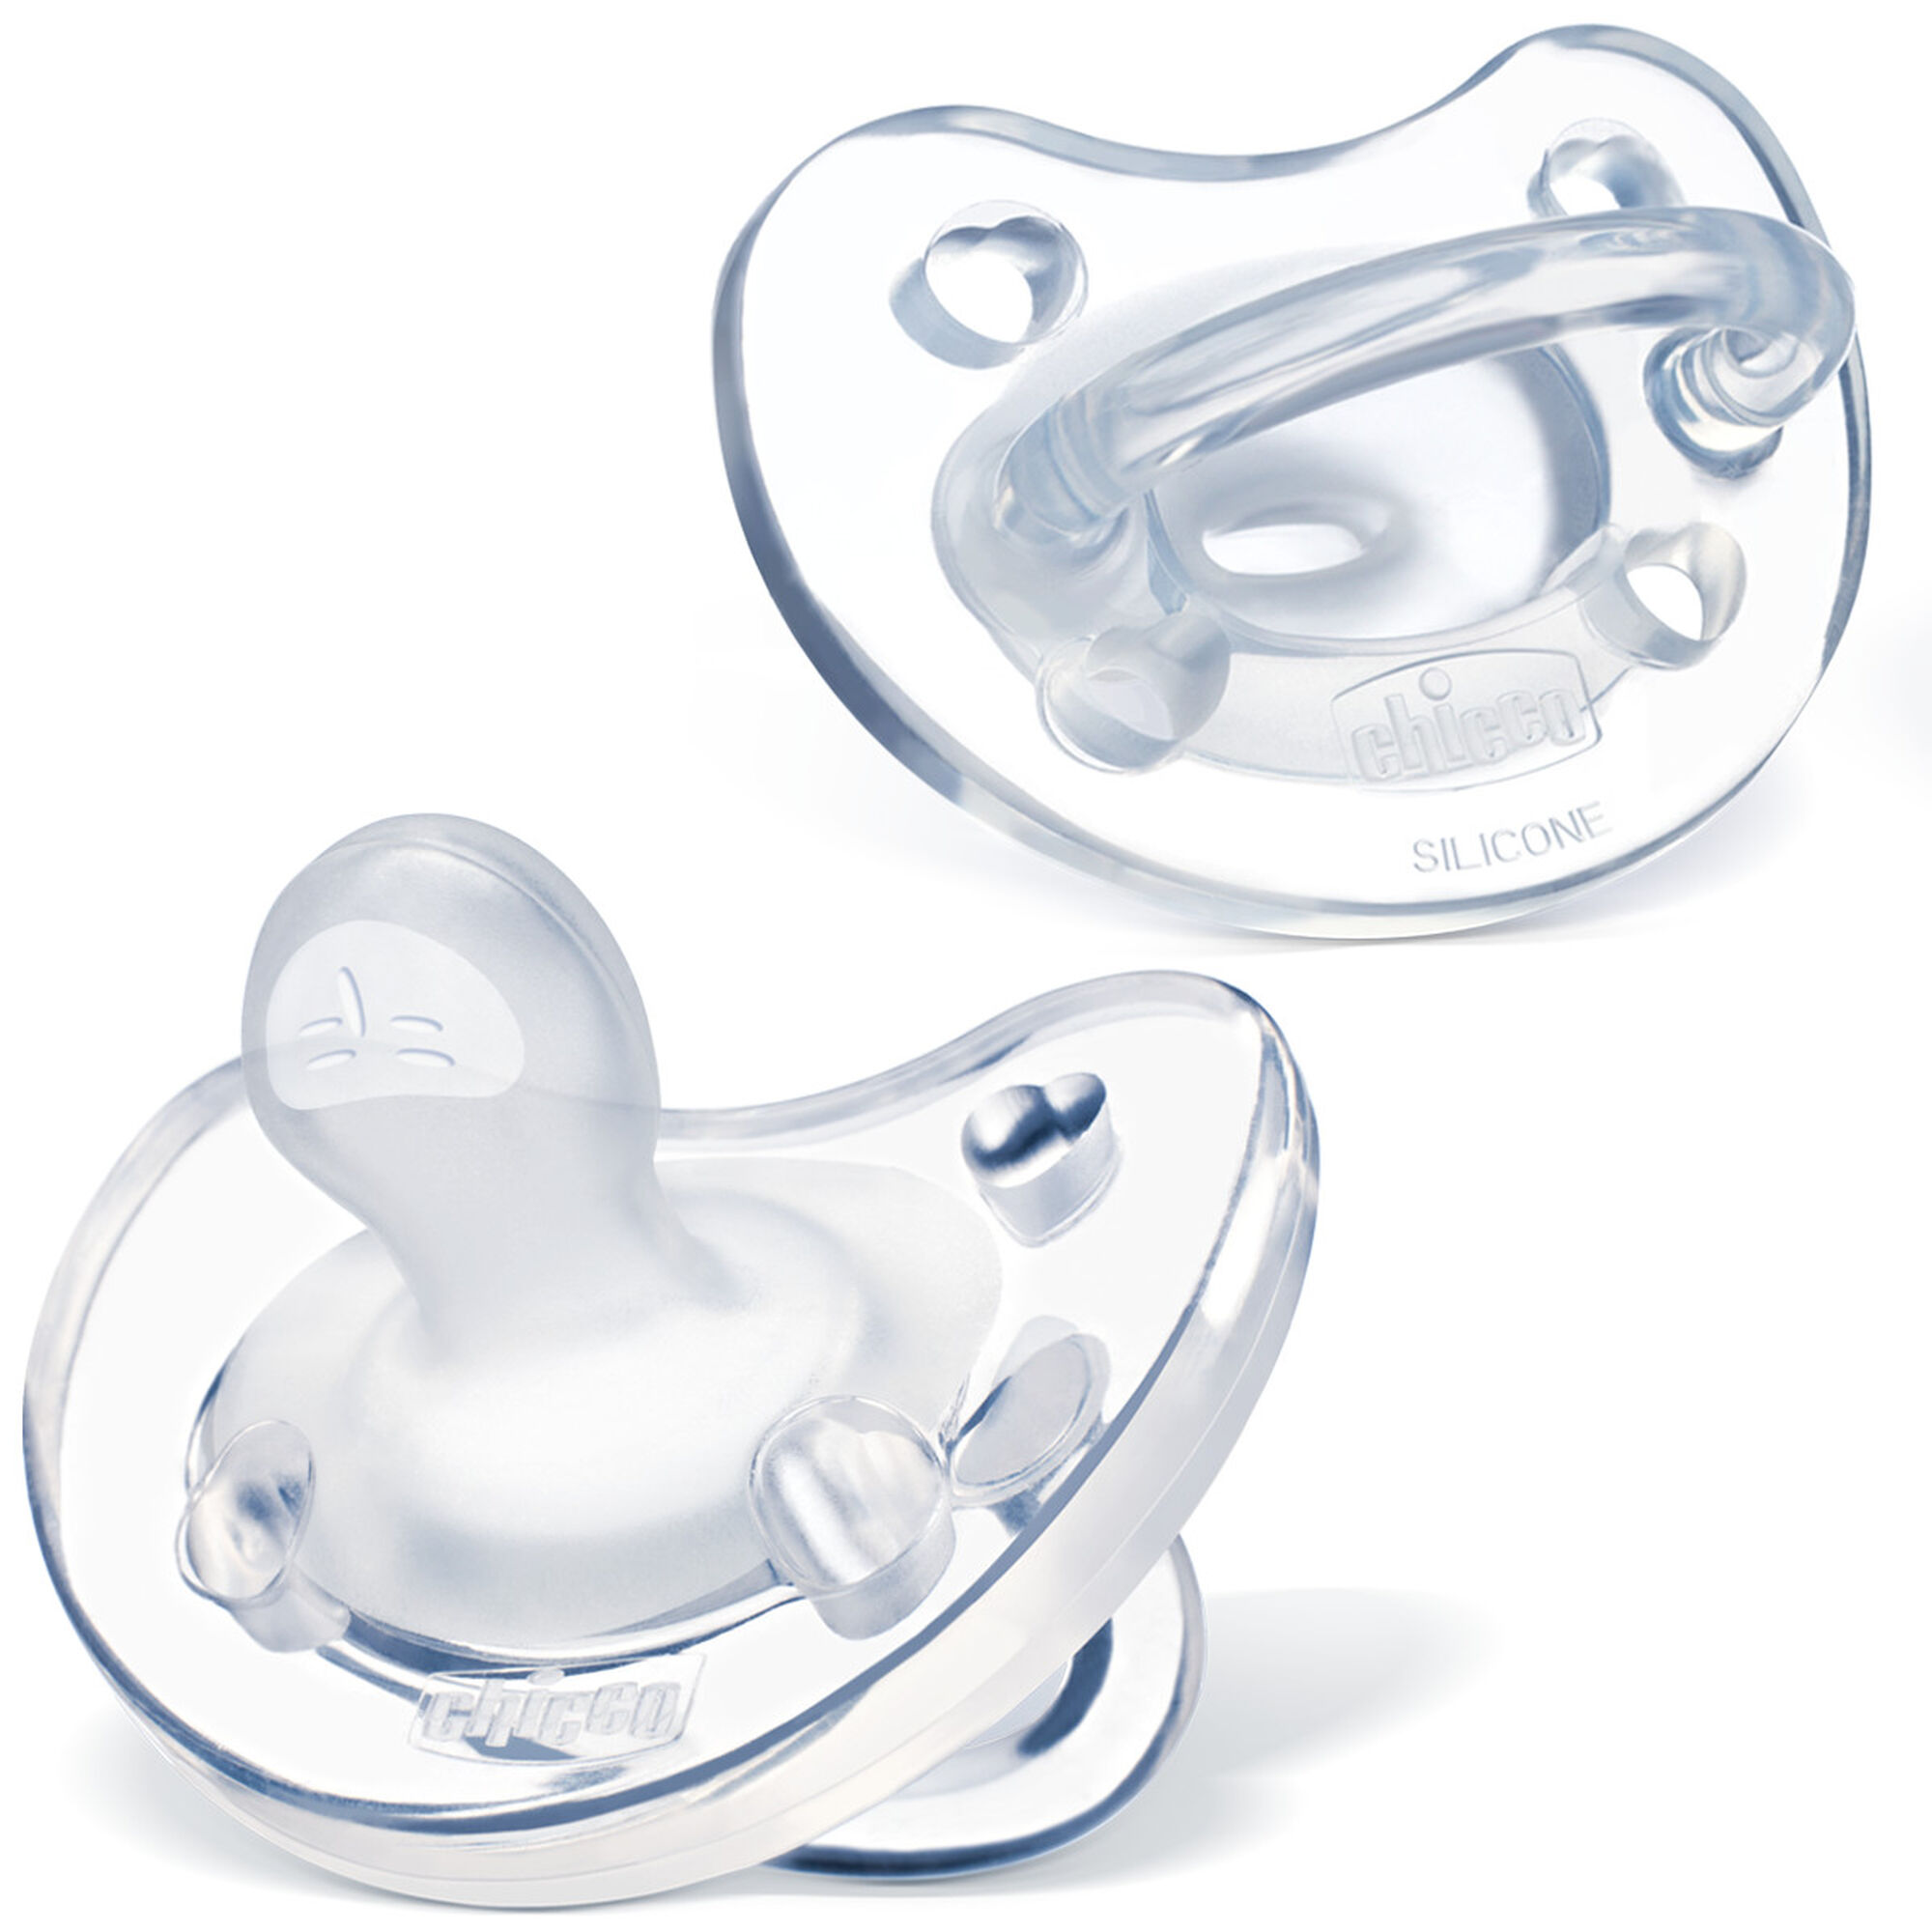 https://www.momjunction.com/wp-content/uploads/product-images/chicco-physioforma-orthodontic-silicone-pacifier_afl457.jpg